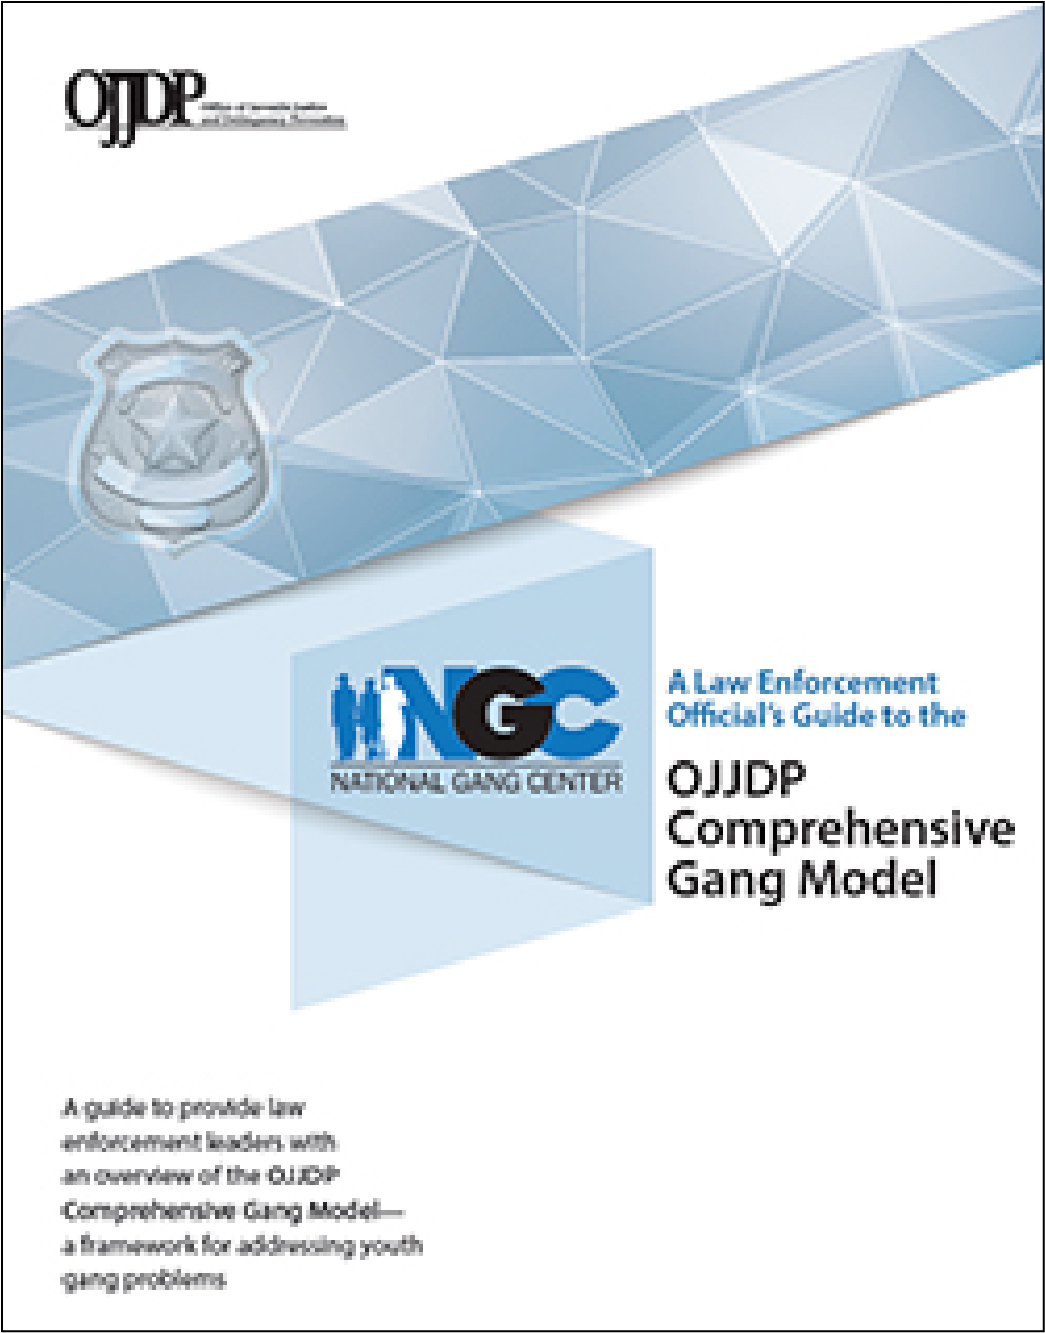 Thumbnail of A Law Enforcement Official's Guide to the OJJDP Comprehensive Gang Model